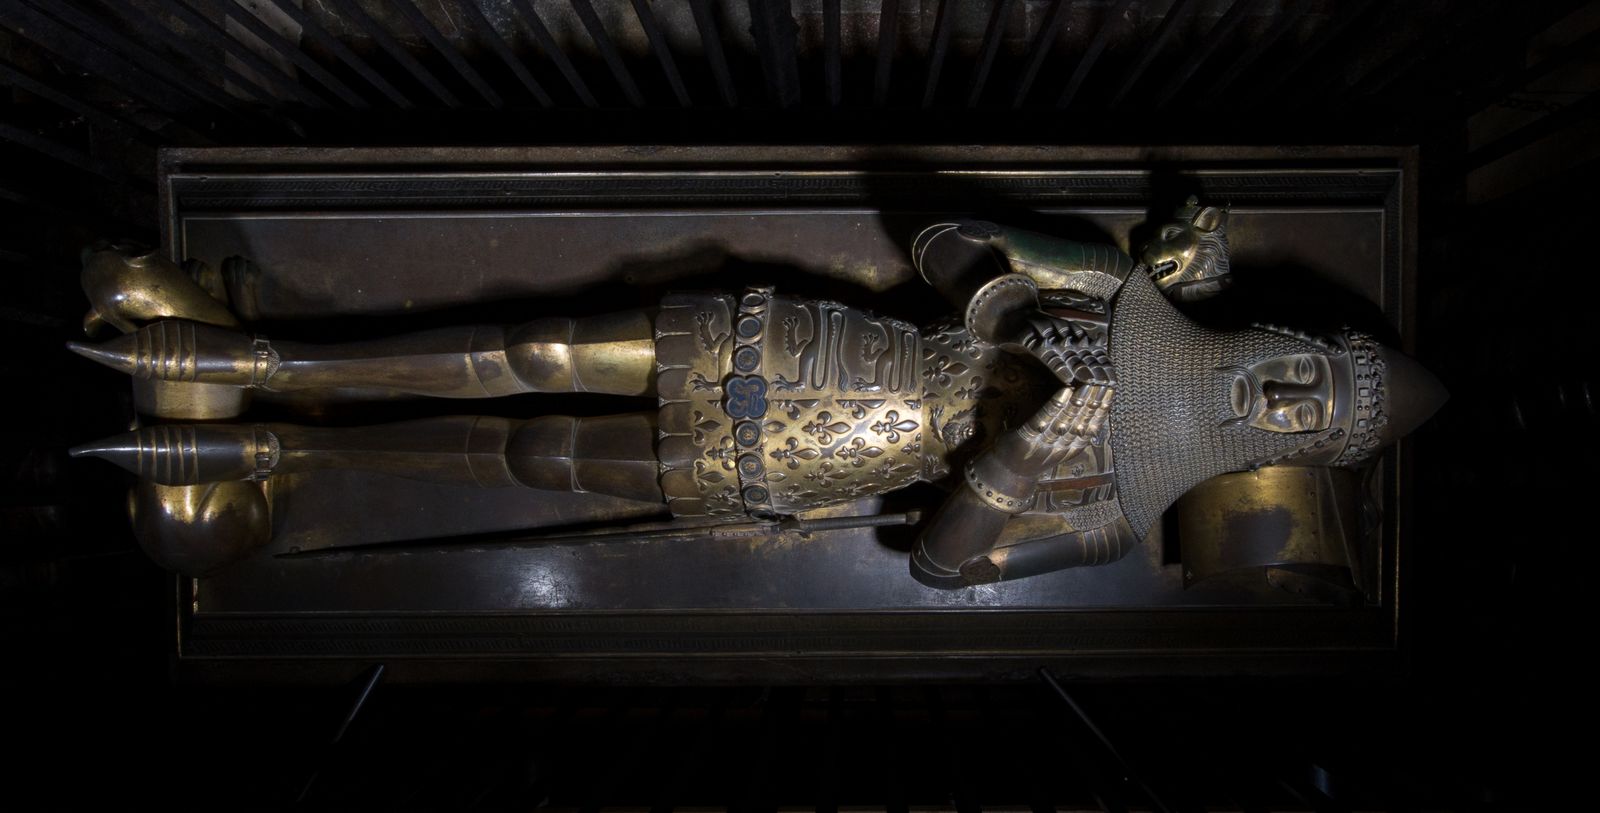 Thanks to Medical Technology, the Black Prince's Tomb Reveals Its